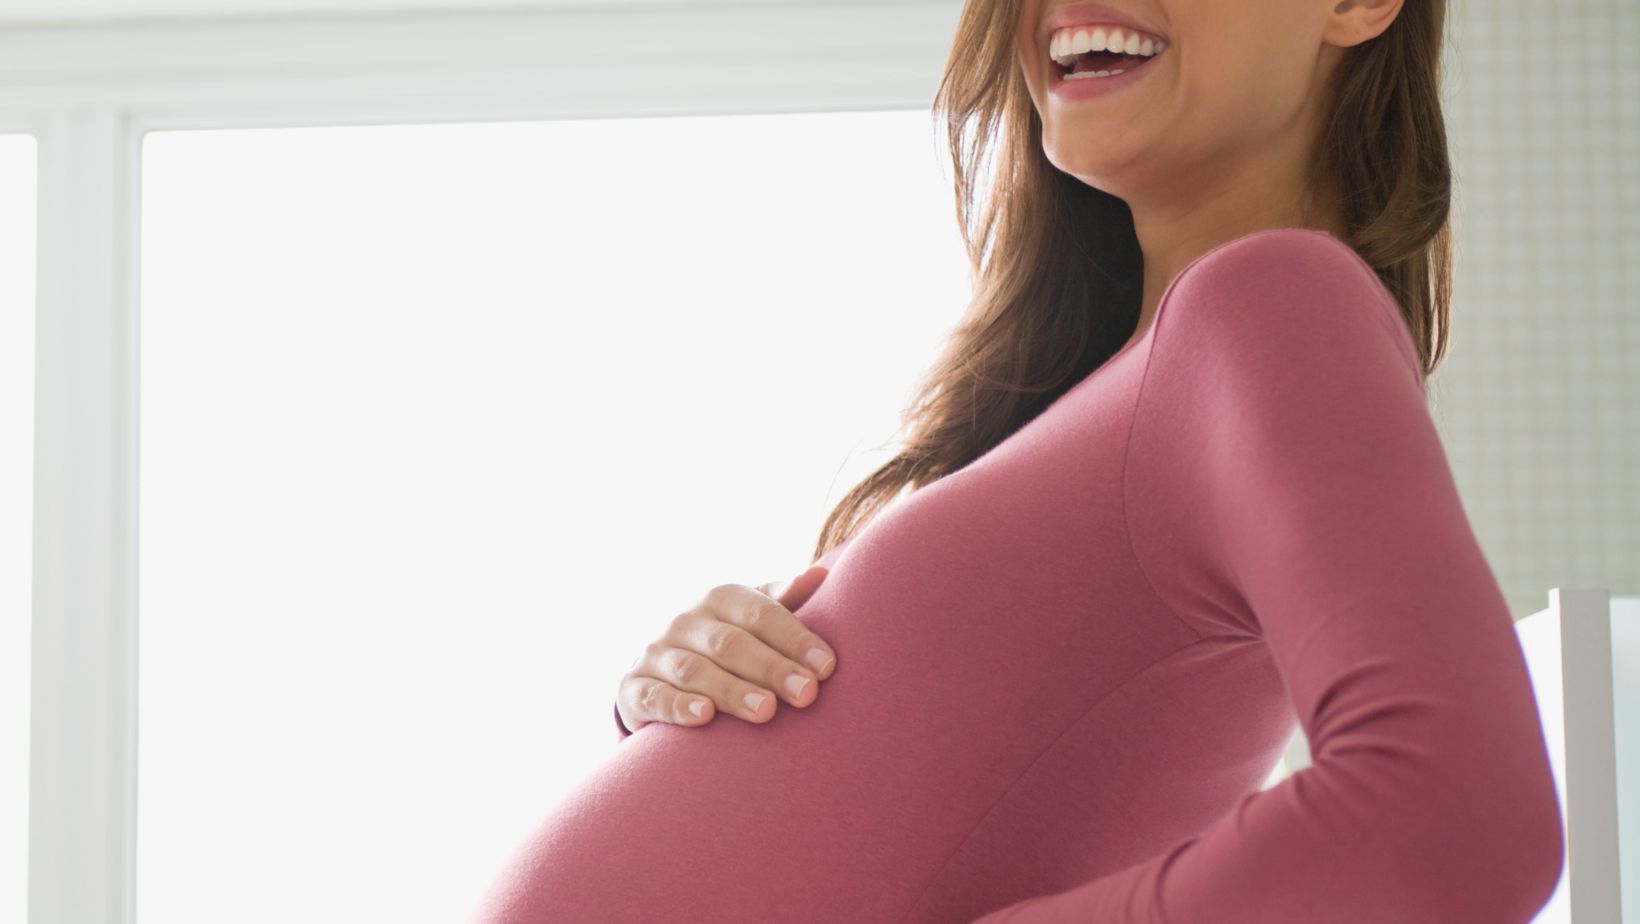 Can You Get Dental X-Rays When Pregnant?